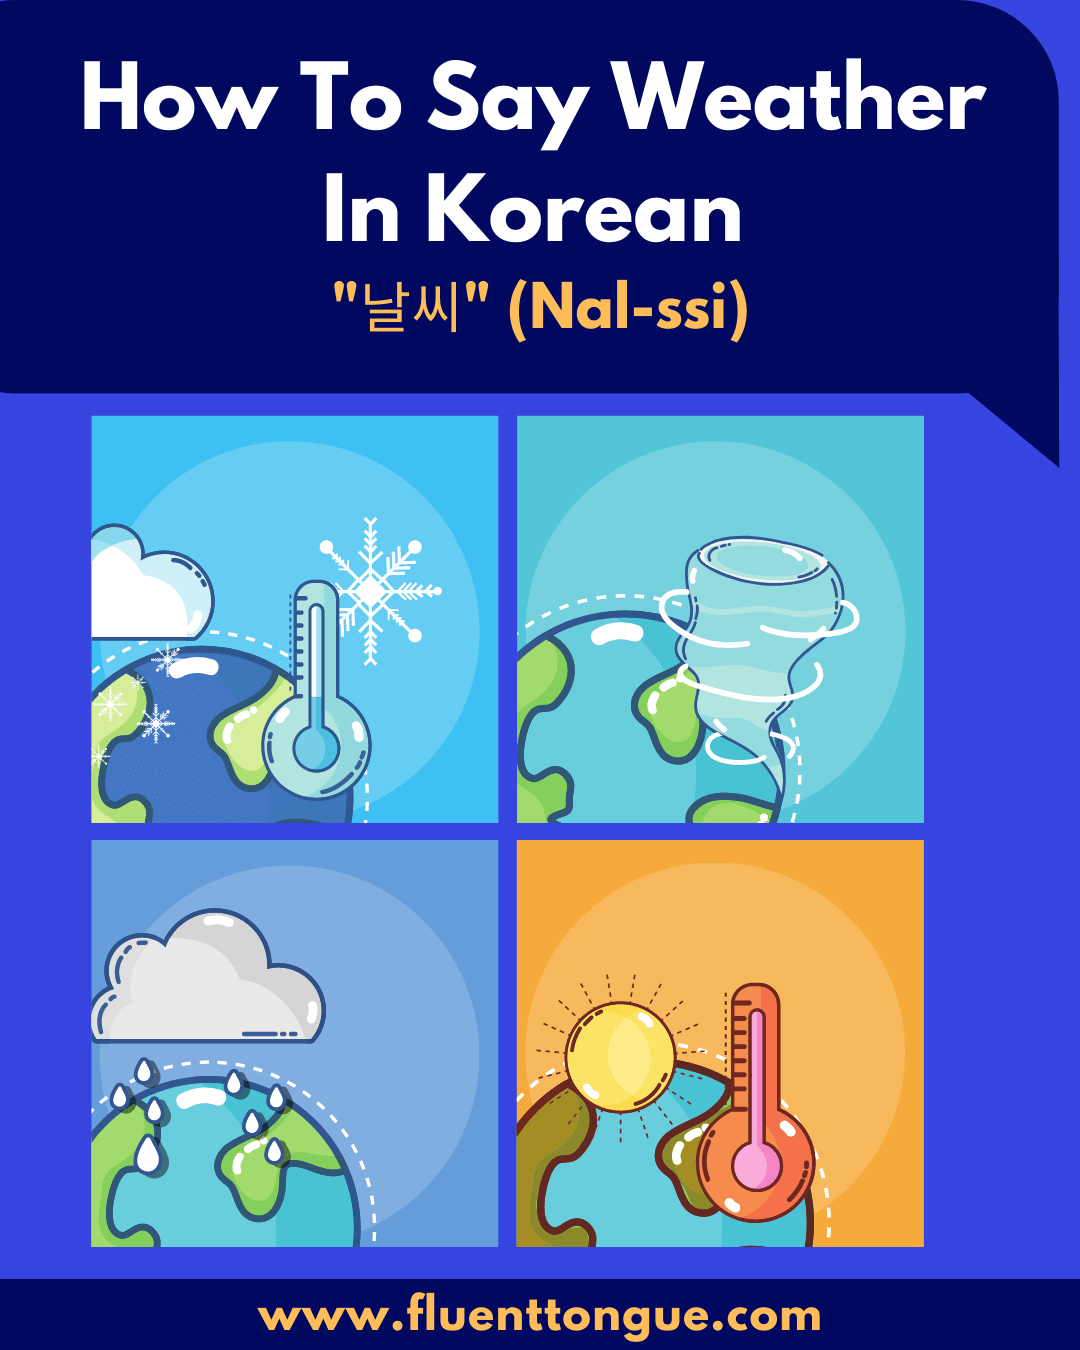 How to say weather in korean?